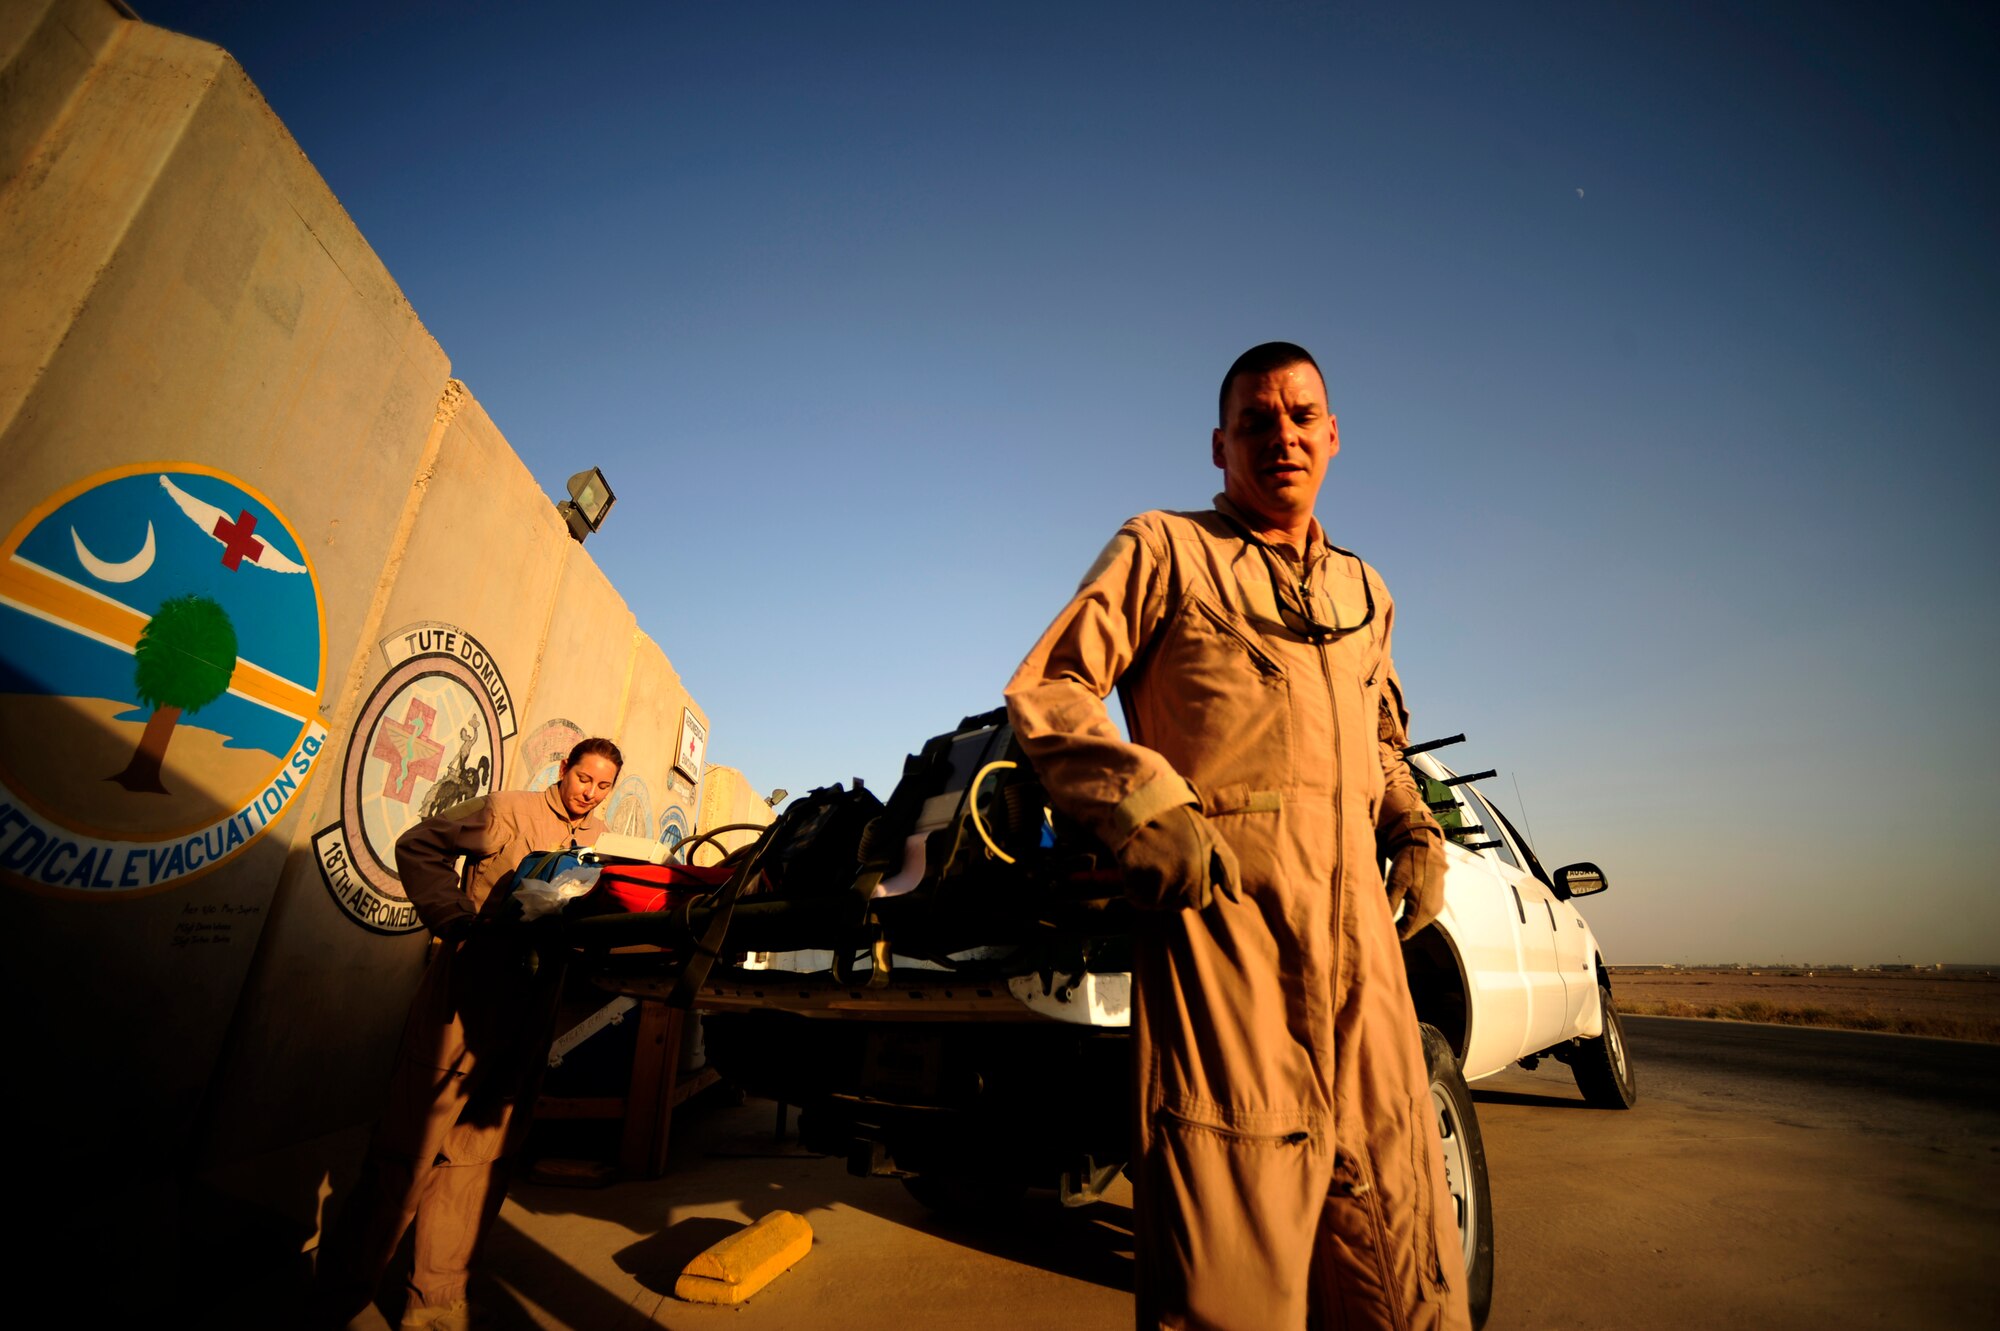 U.S. Air Force reservist Senior Master Sgt. Tony Staut and Tech Sgt. Margerite Hellwich, aeromedical evacuation technicians assigned to the 362nd Expeditionary Aeromedical Evacuation Flight, loads gear in pick up for transit to the plane prior to flying mission at Joint Base Balad, Iraq on July 17, 2010.
(U.S. Air Force photo by Staff Sgt. Andy M. Kin / Released)